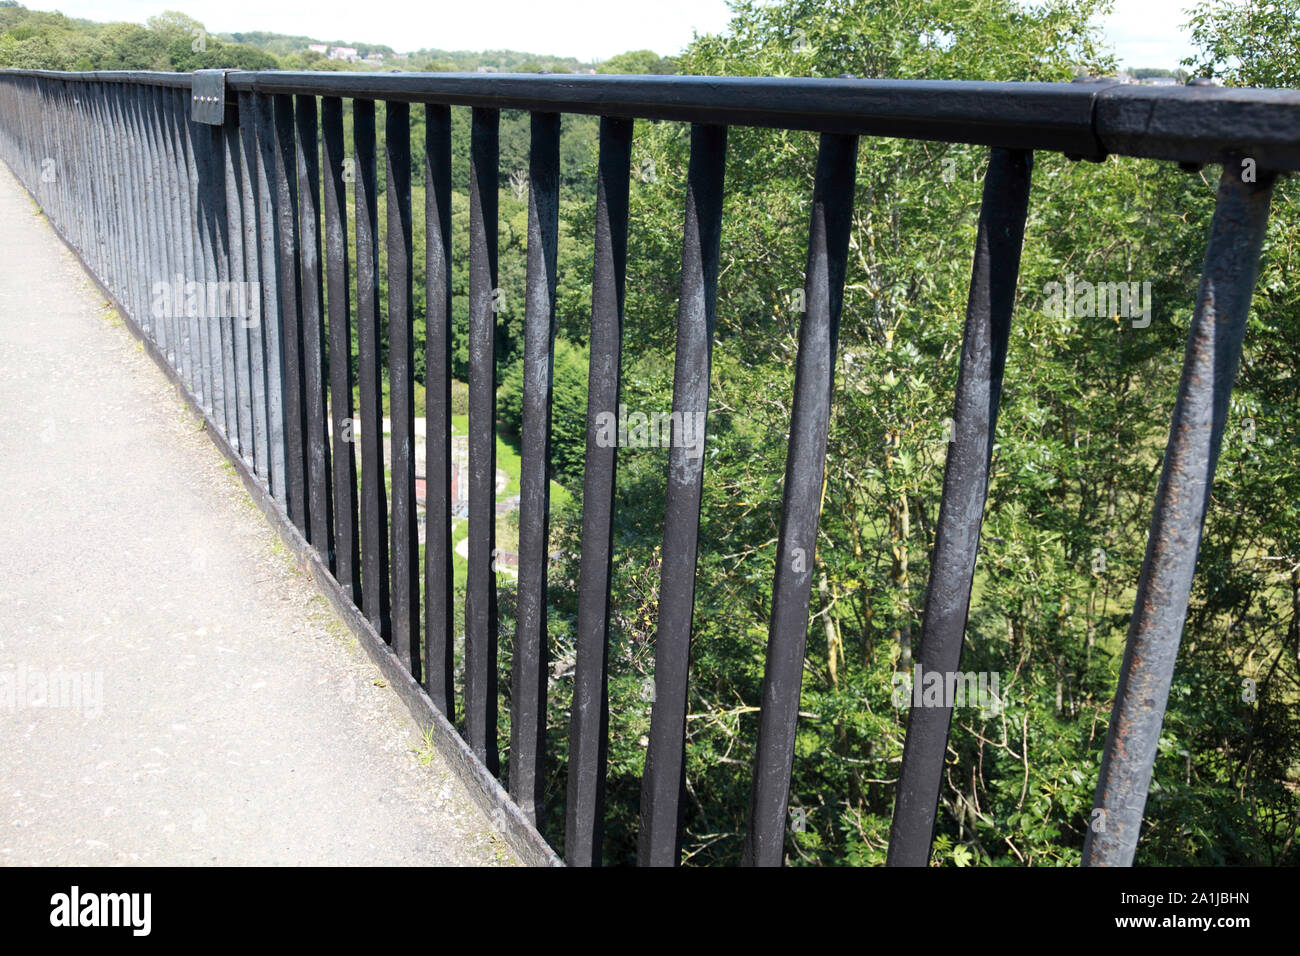 The railing next to the towpath on Pontcysyllte Aqueduct which carries the Llangollen Canal over the river Dee in north Wales Stock Photo